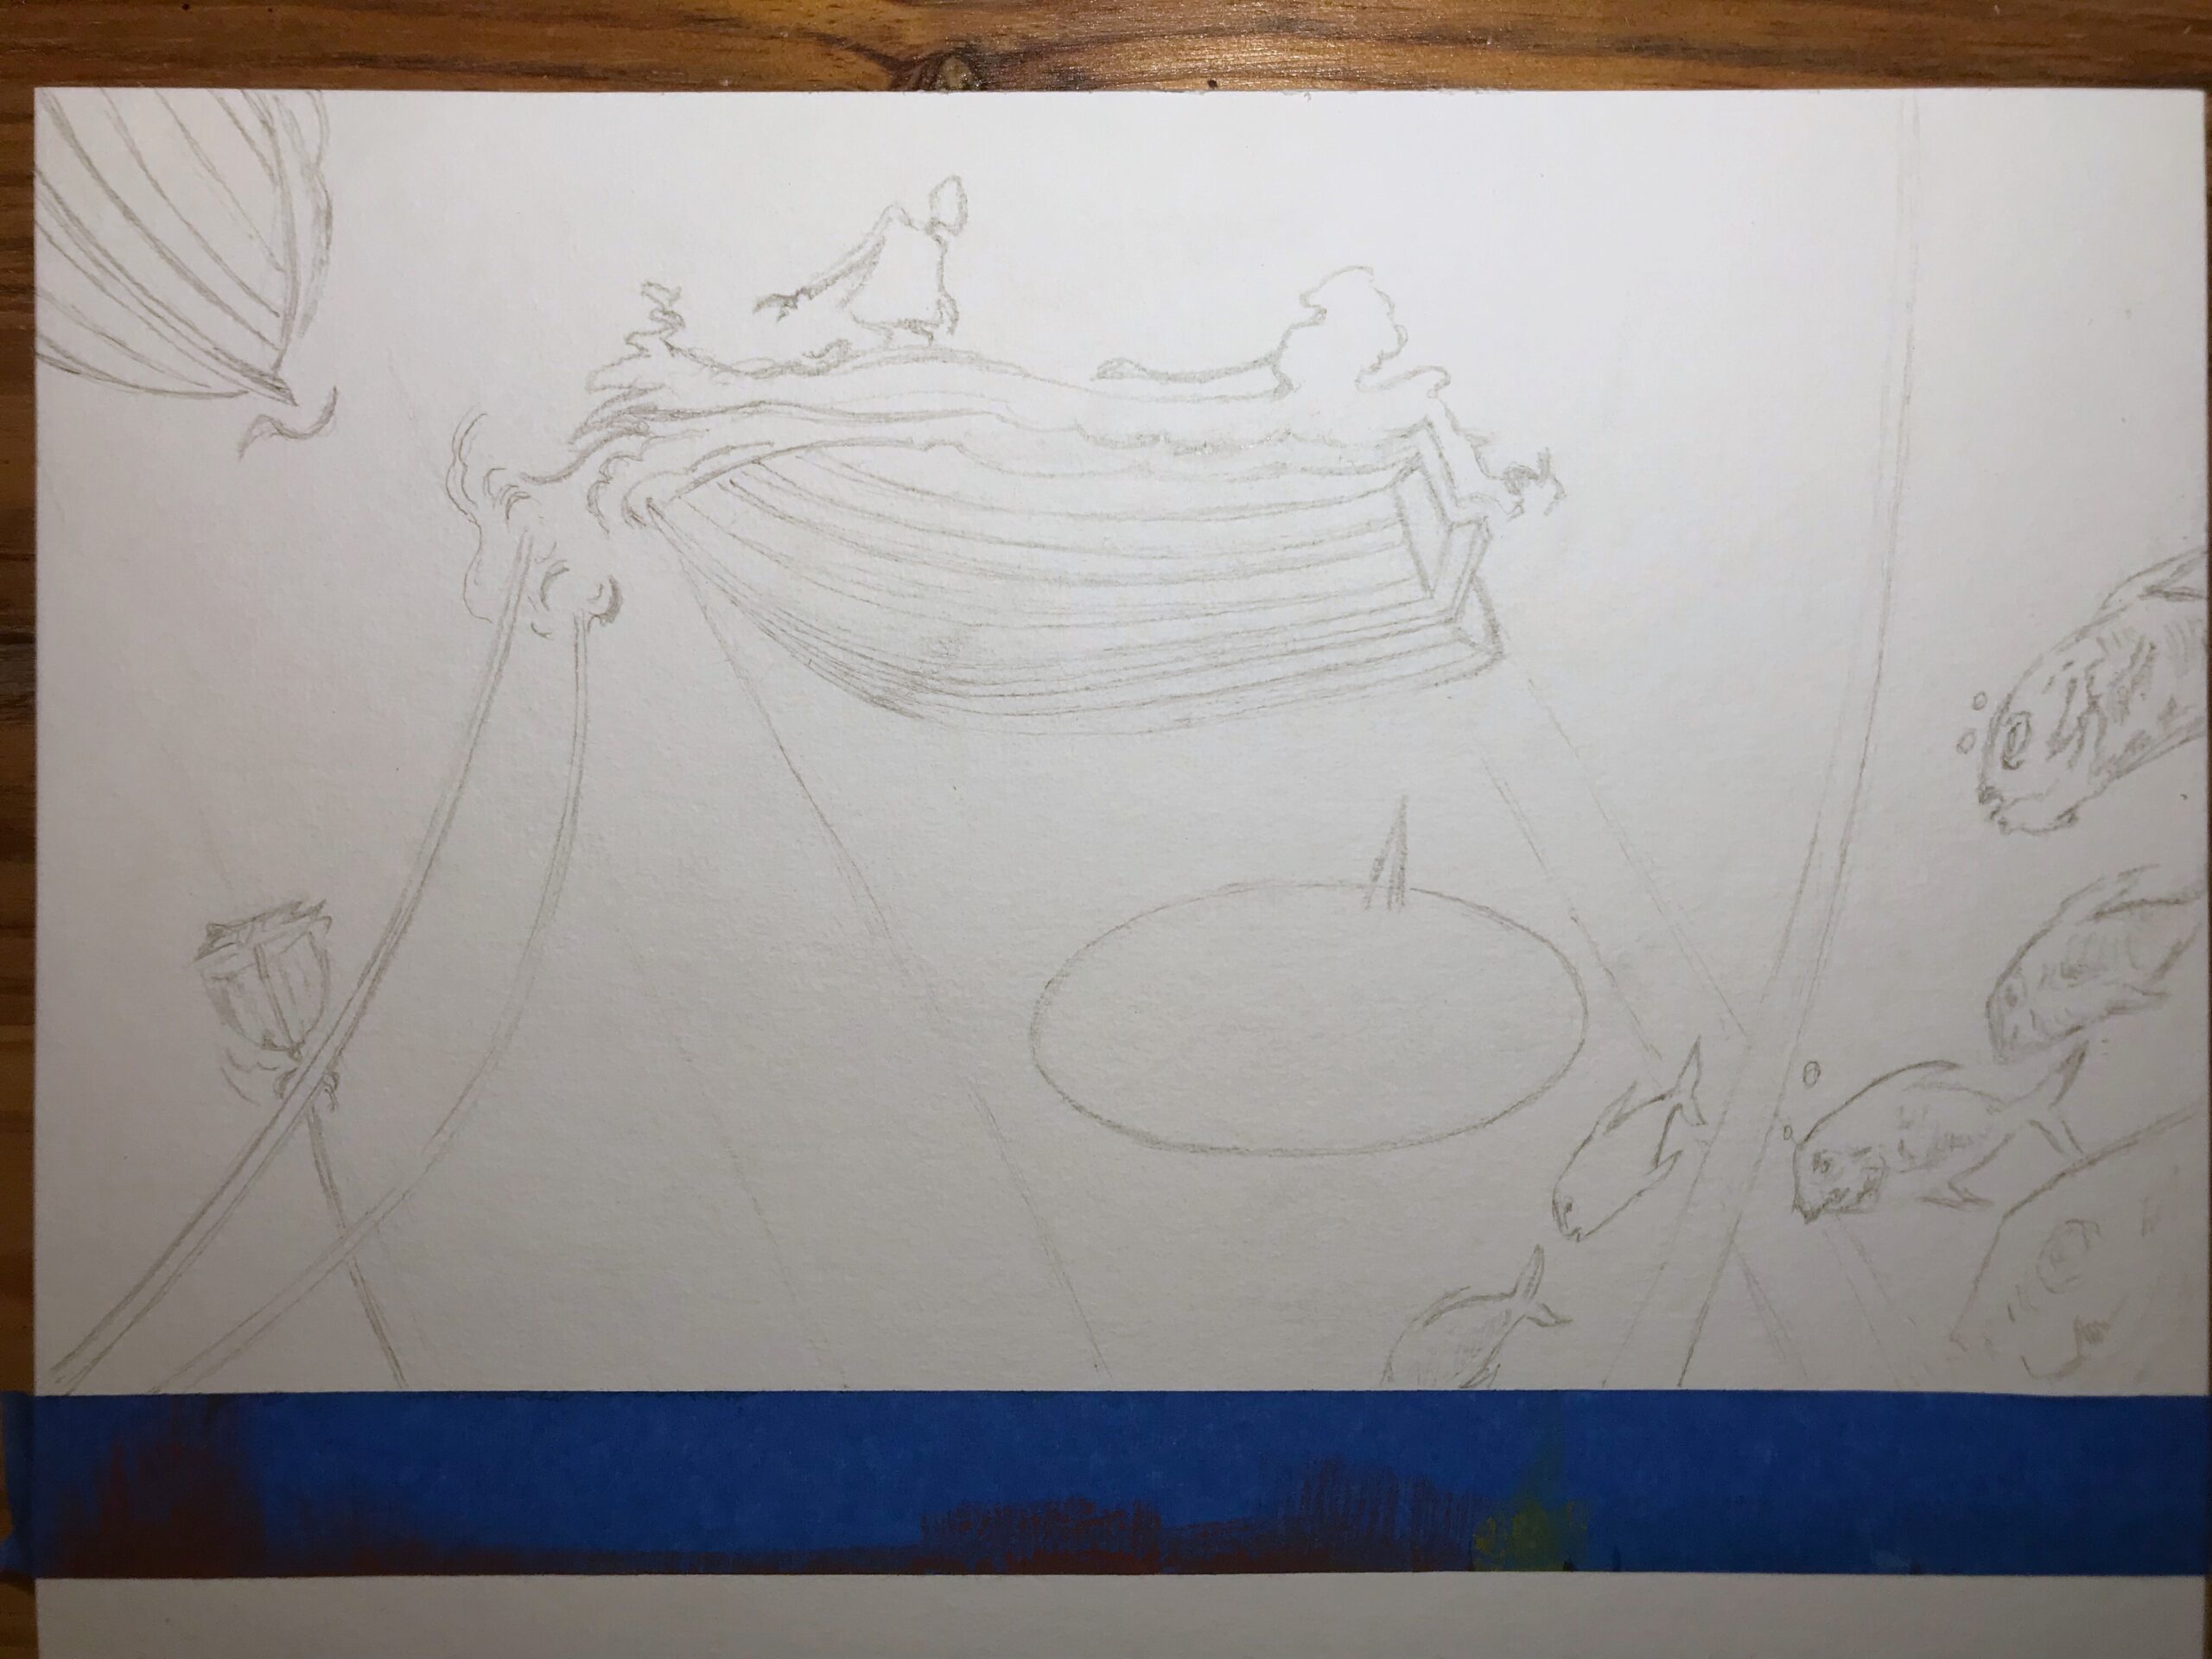 Pencil sketch: three hulls and moorings seen from below, rough silhouettes of two people in one of the boats and the placeholder for a speech bubble underneath, a few fish of various sizes on the side